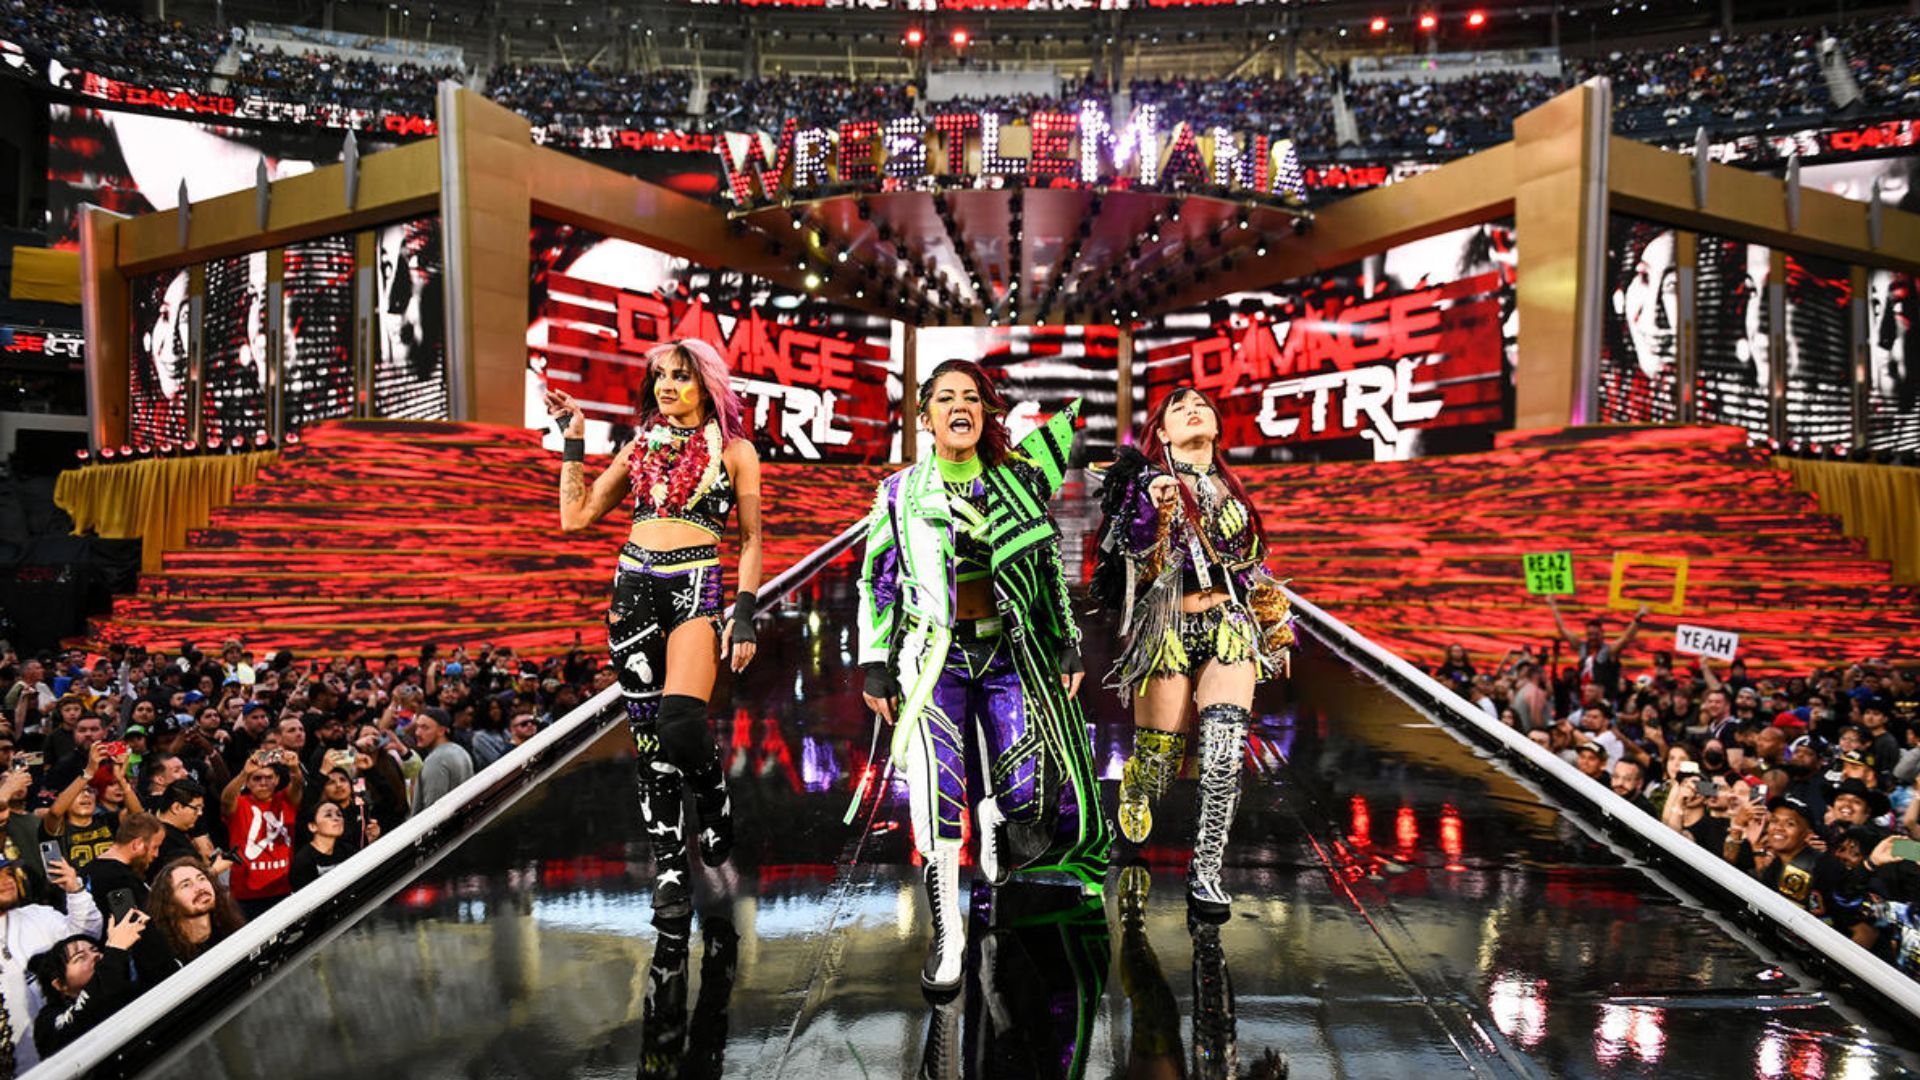 Damage CTRL are two-time WWE Women